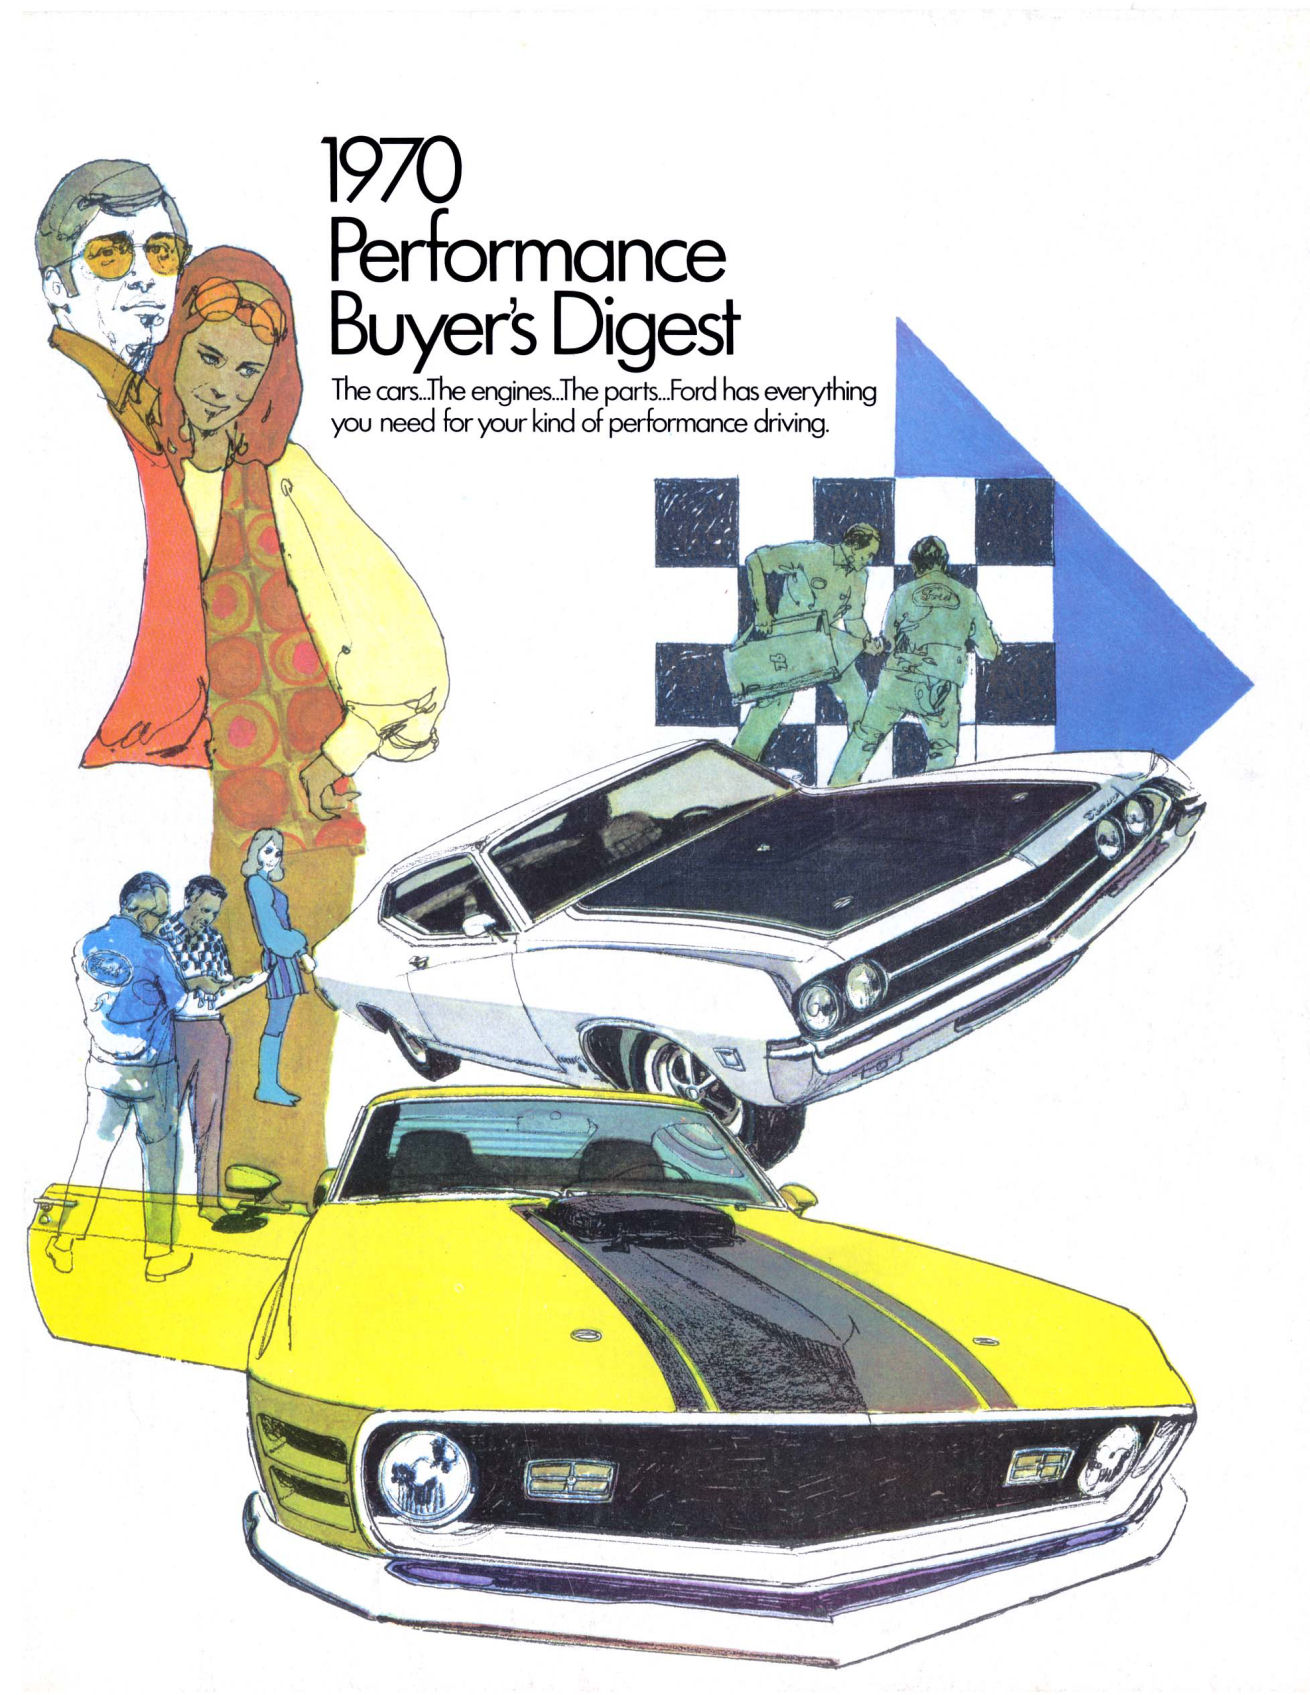 1970_Ford_Performance_Buyers_Digest_Rev-01